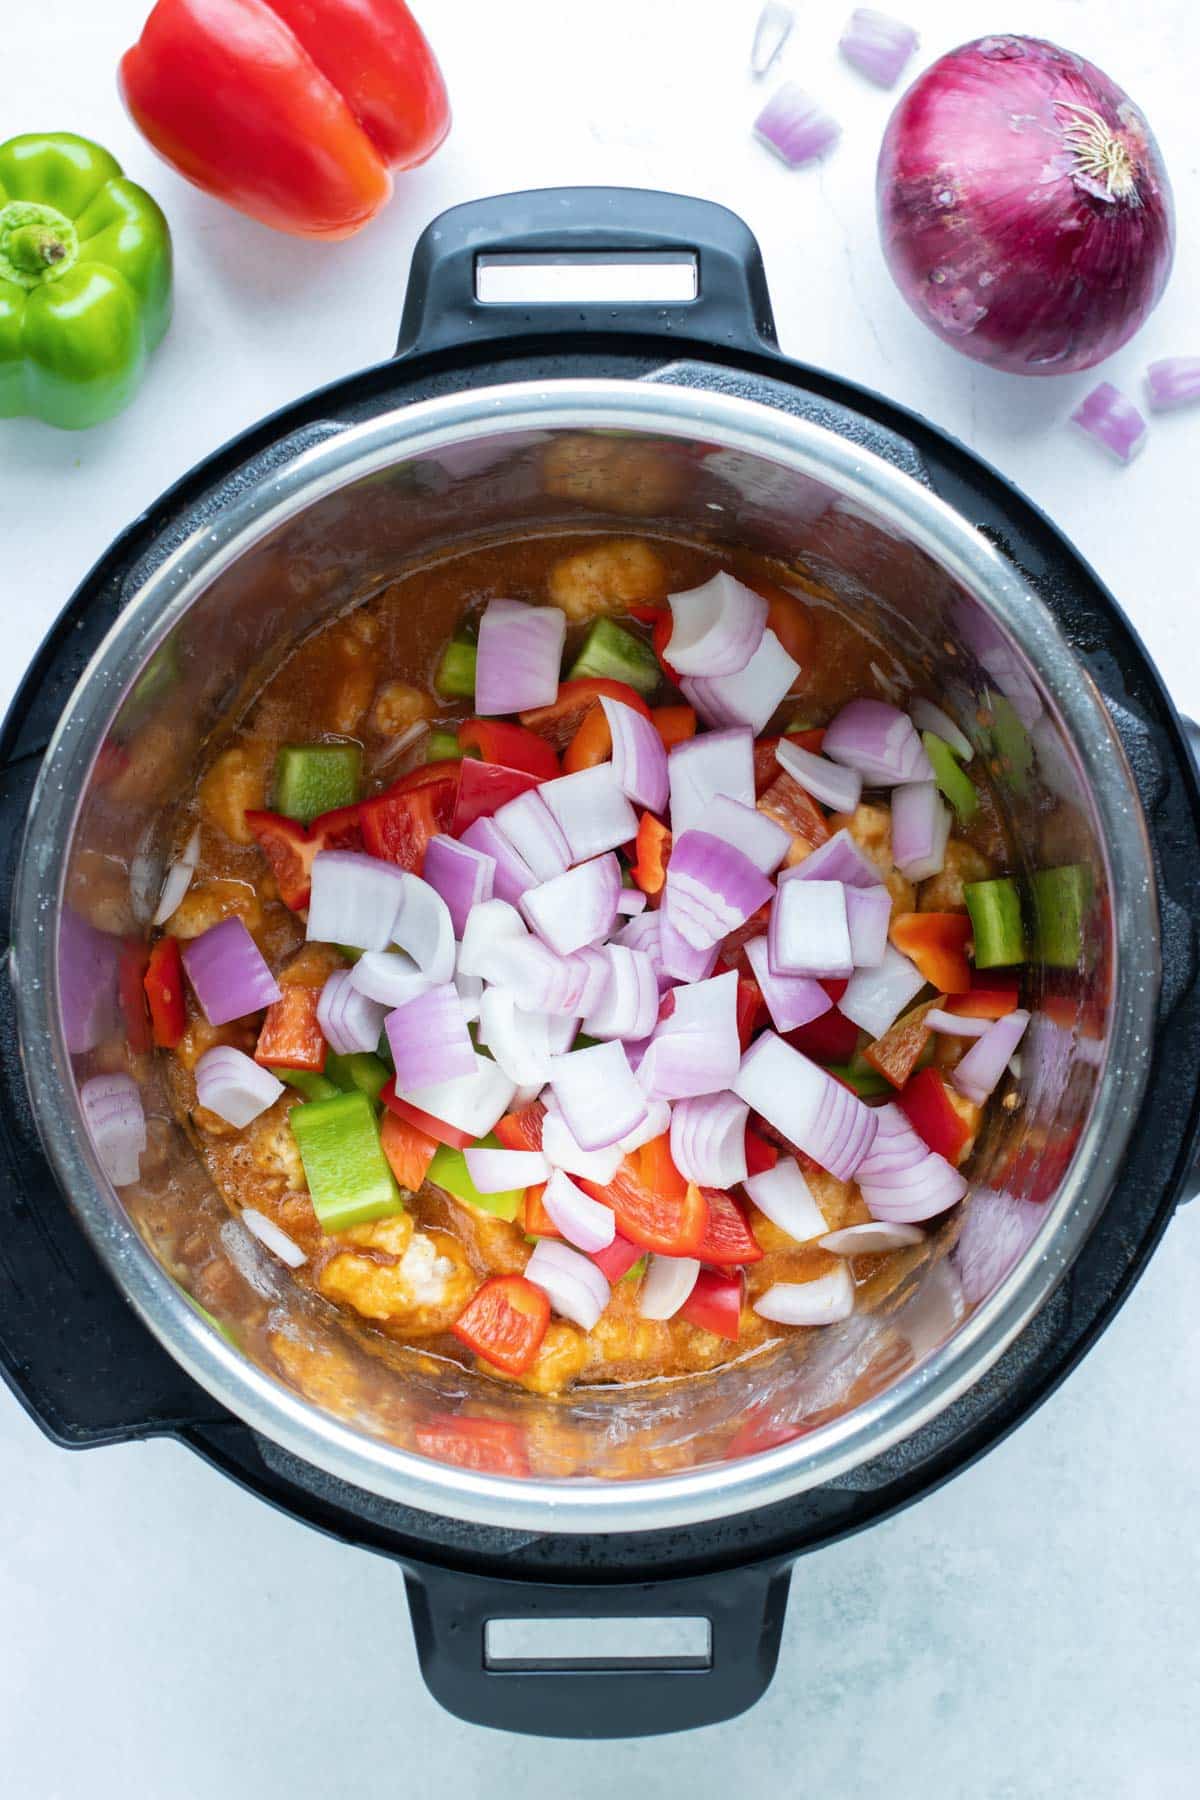 Chopped onions and bell peppers are added to chicken and sauce for Instant Pot Hawaiian Chicken.